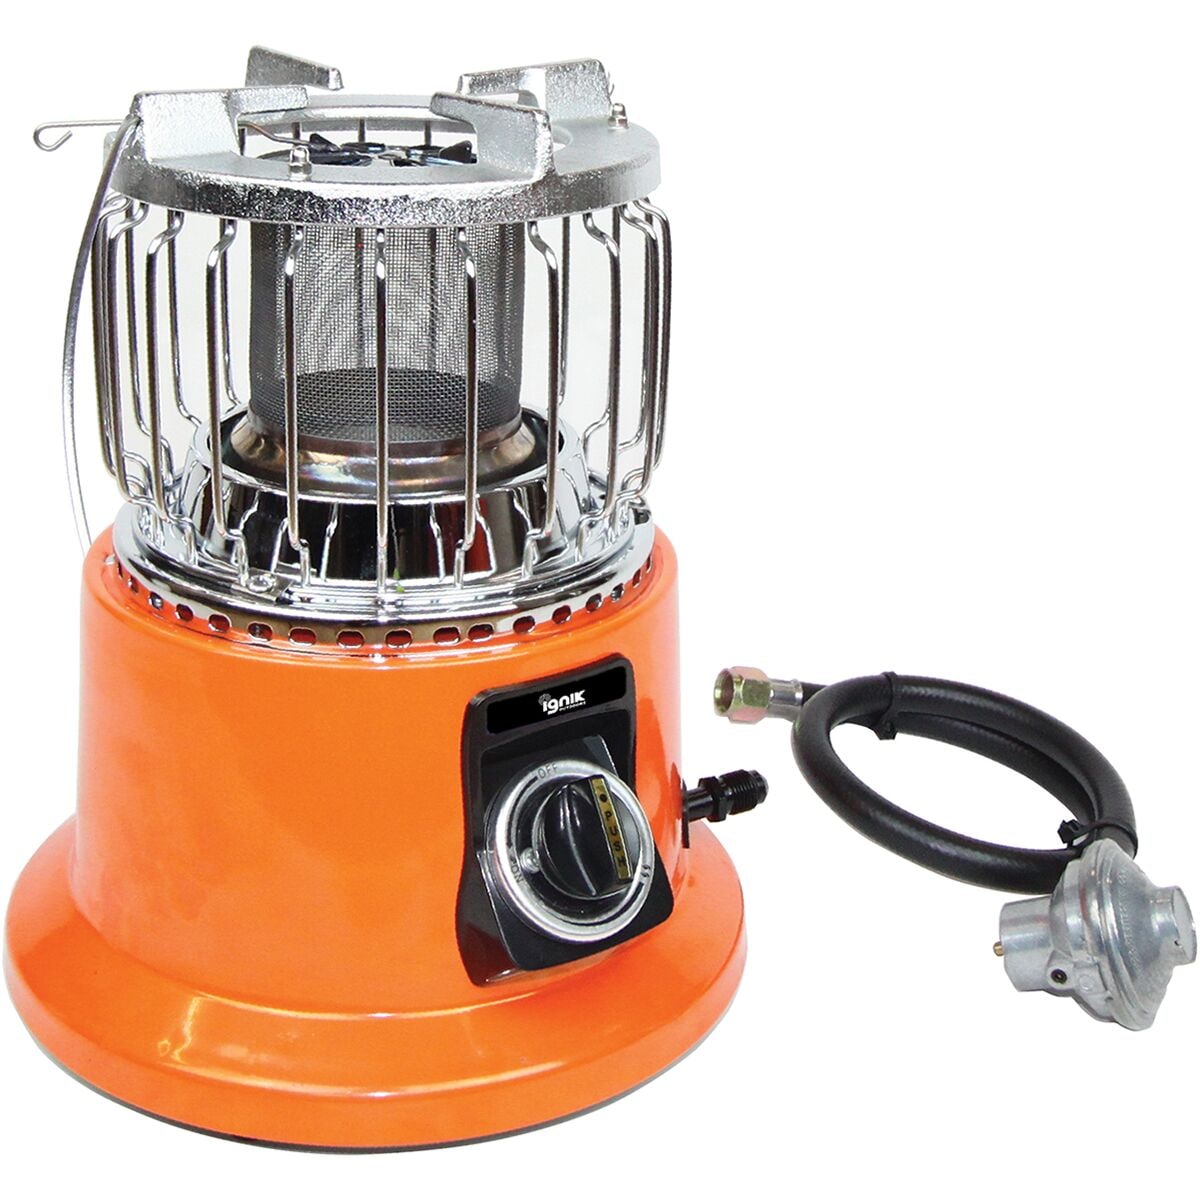 Ignik Outdoors 2-in-1 Heater/Stove